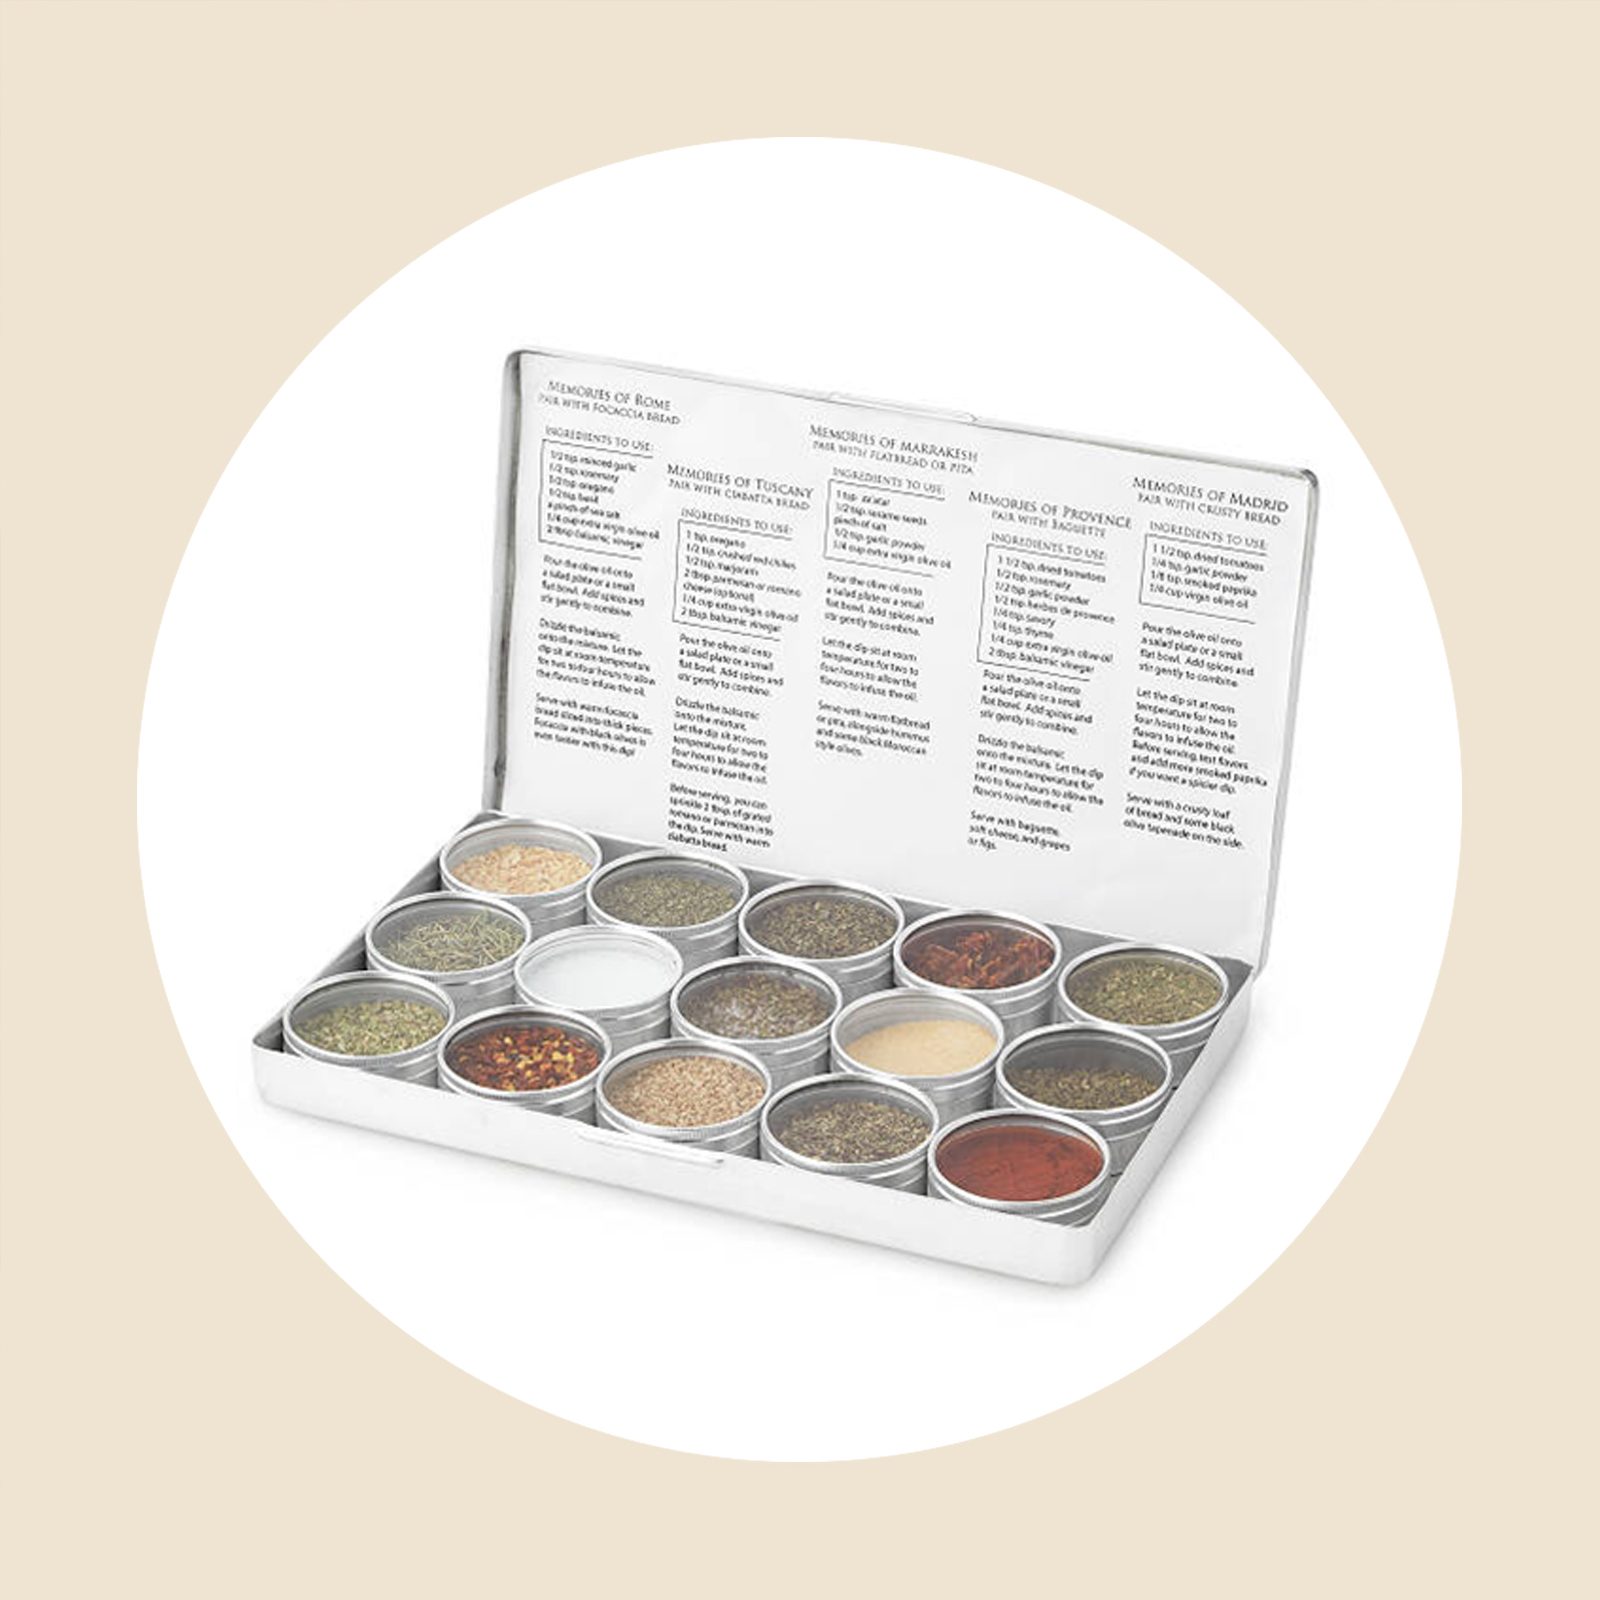 Gourmet Oil Dipping Spices